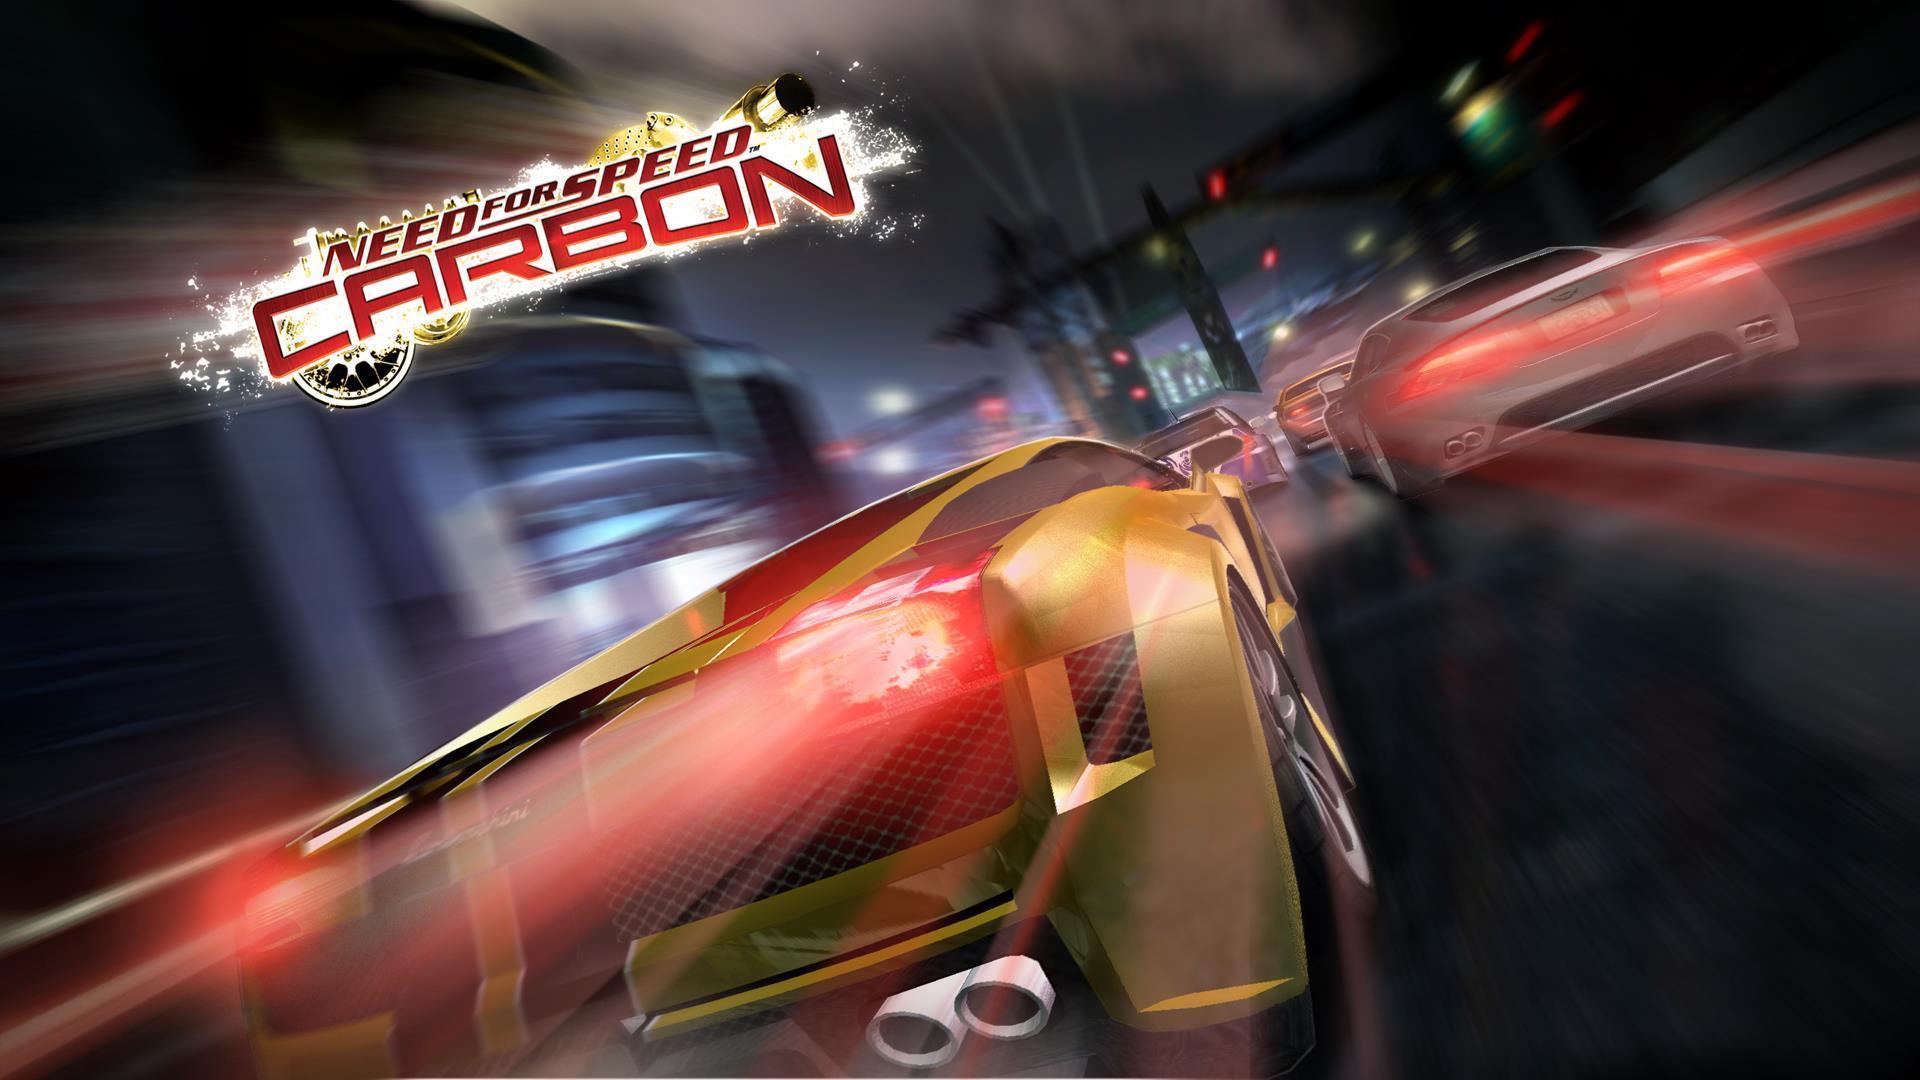 HD Need For Speed: Carbon Wallpaper